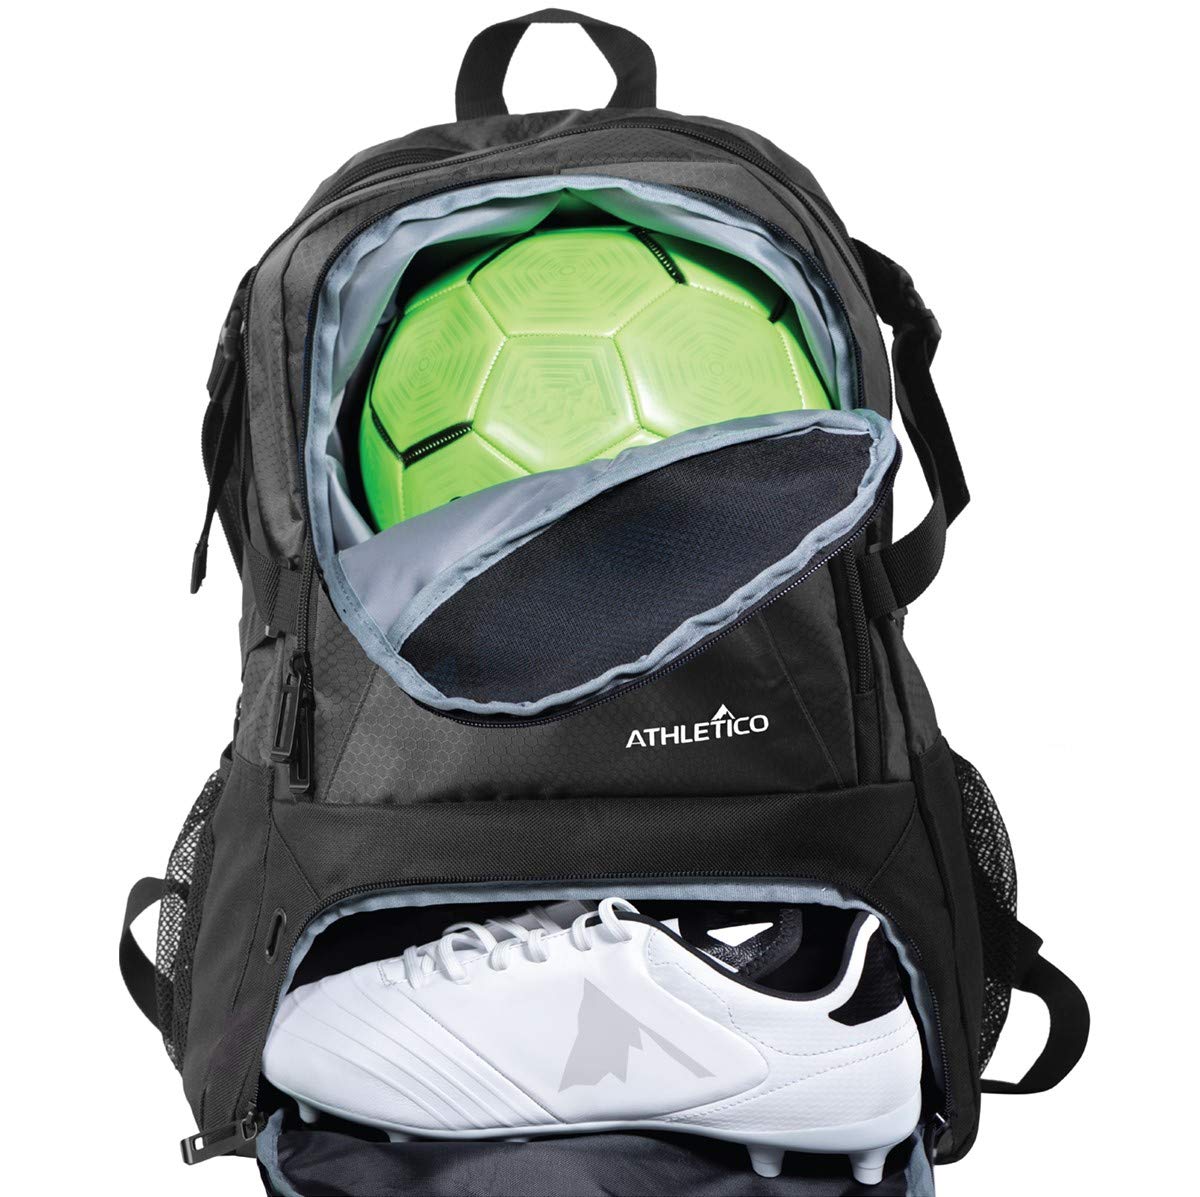 Athletico National Soccer Bag - Backpack for Soccer, Basketball & Football Includes Separate Cleat and Ball Holder  - Good